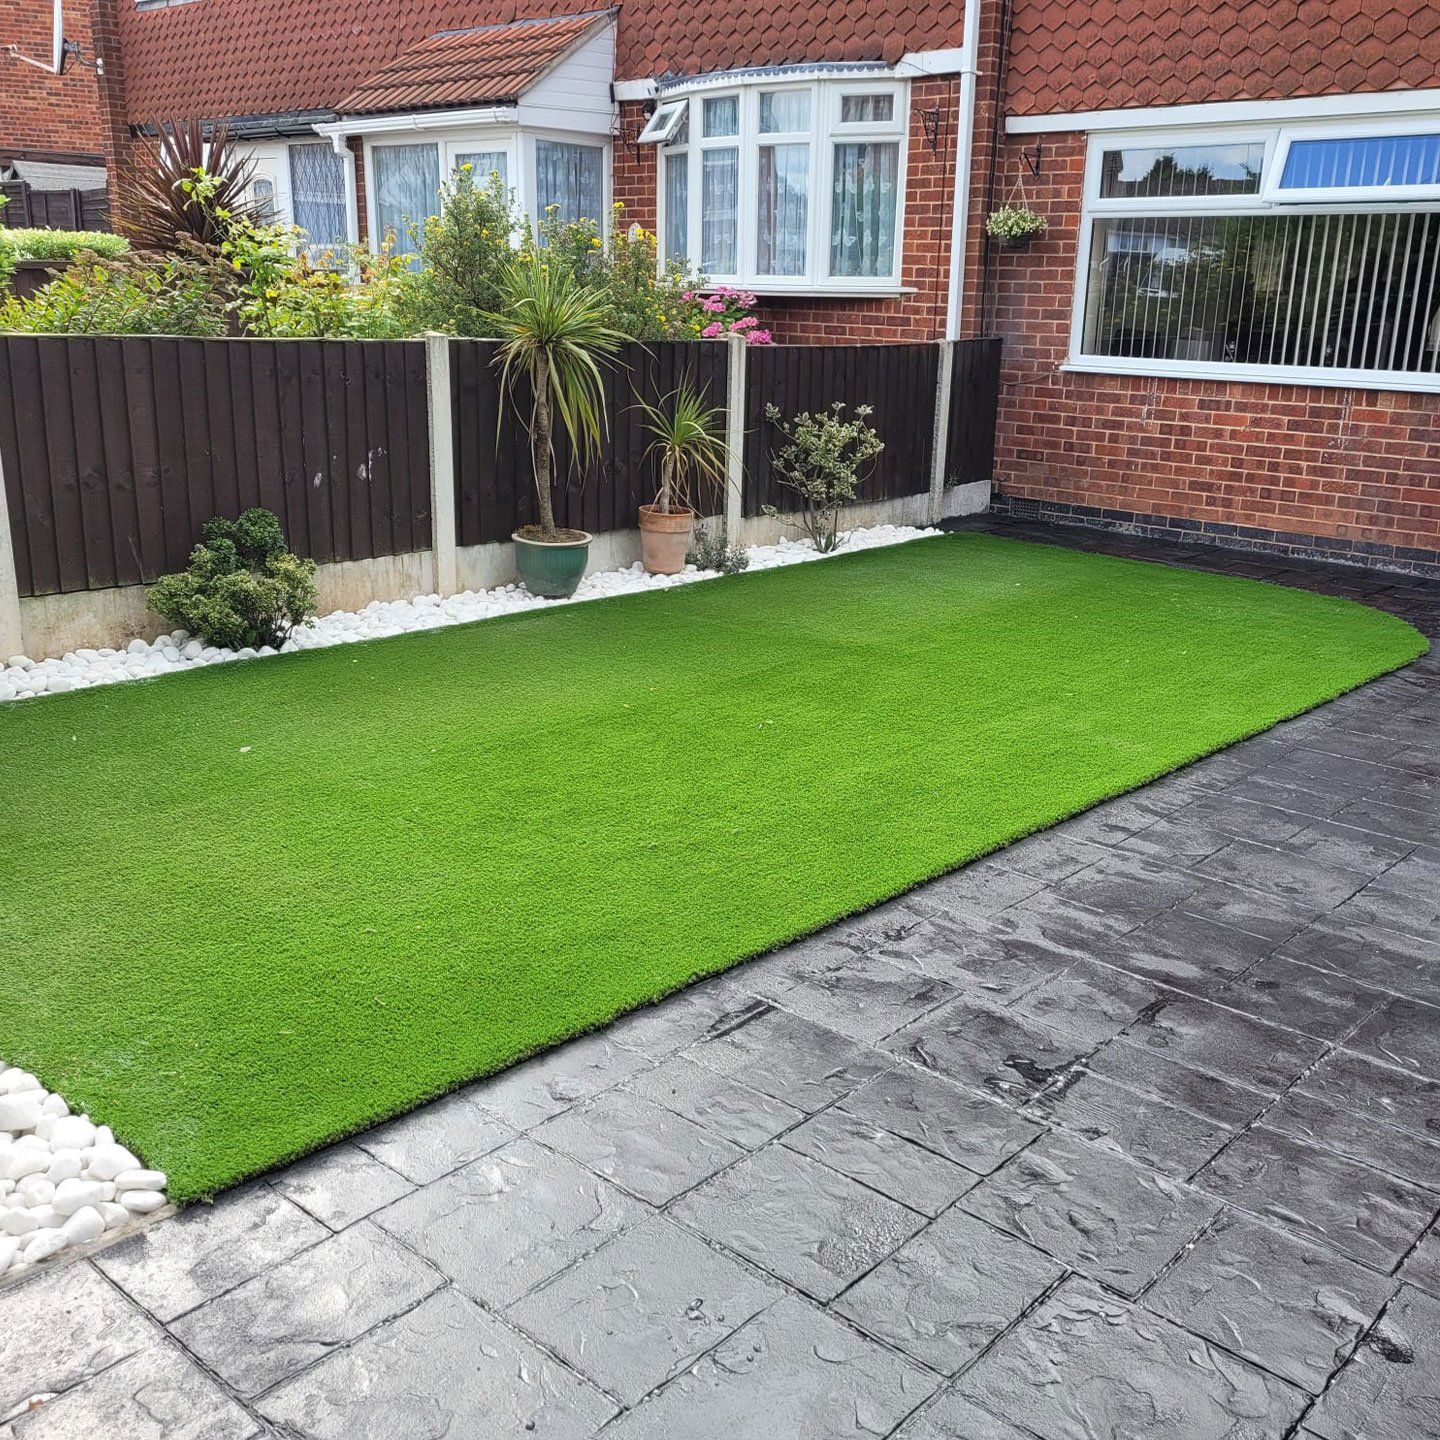 Coventry landscaping showing new artificial grass and patterned concrete paving